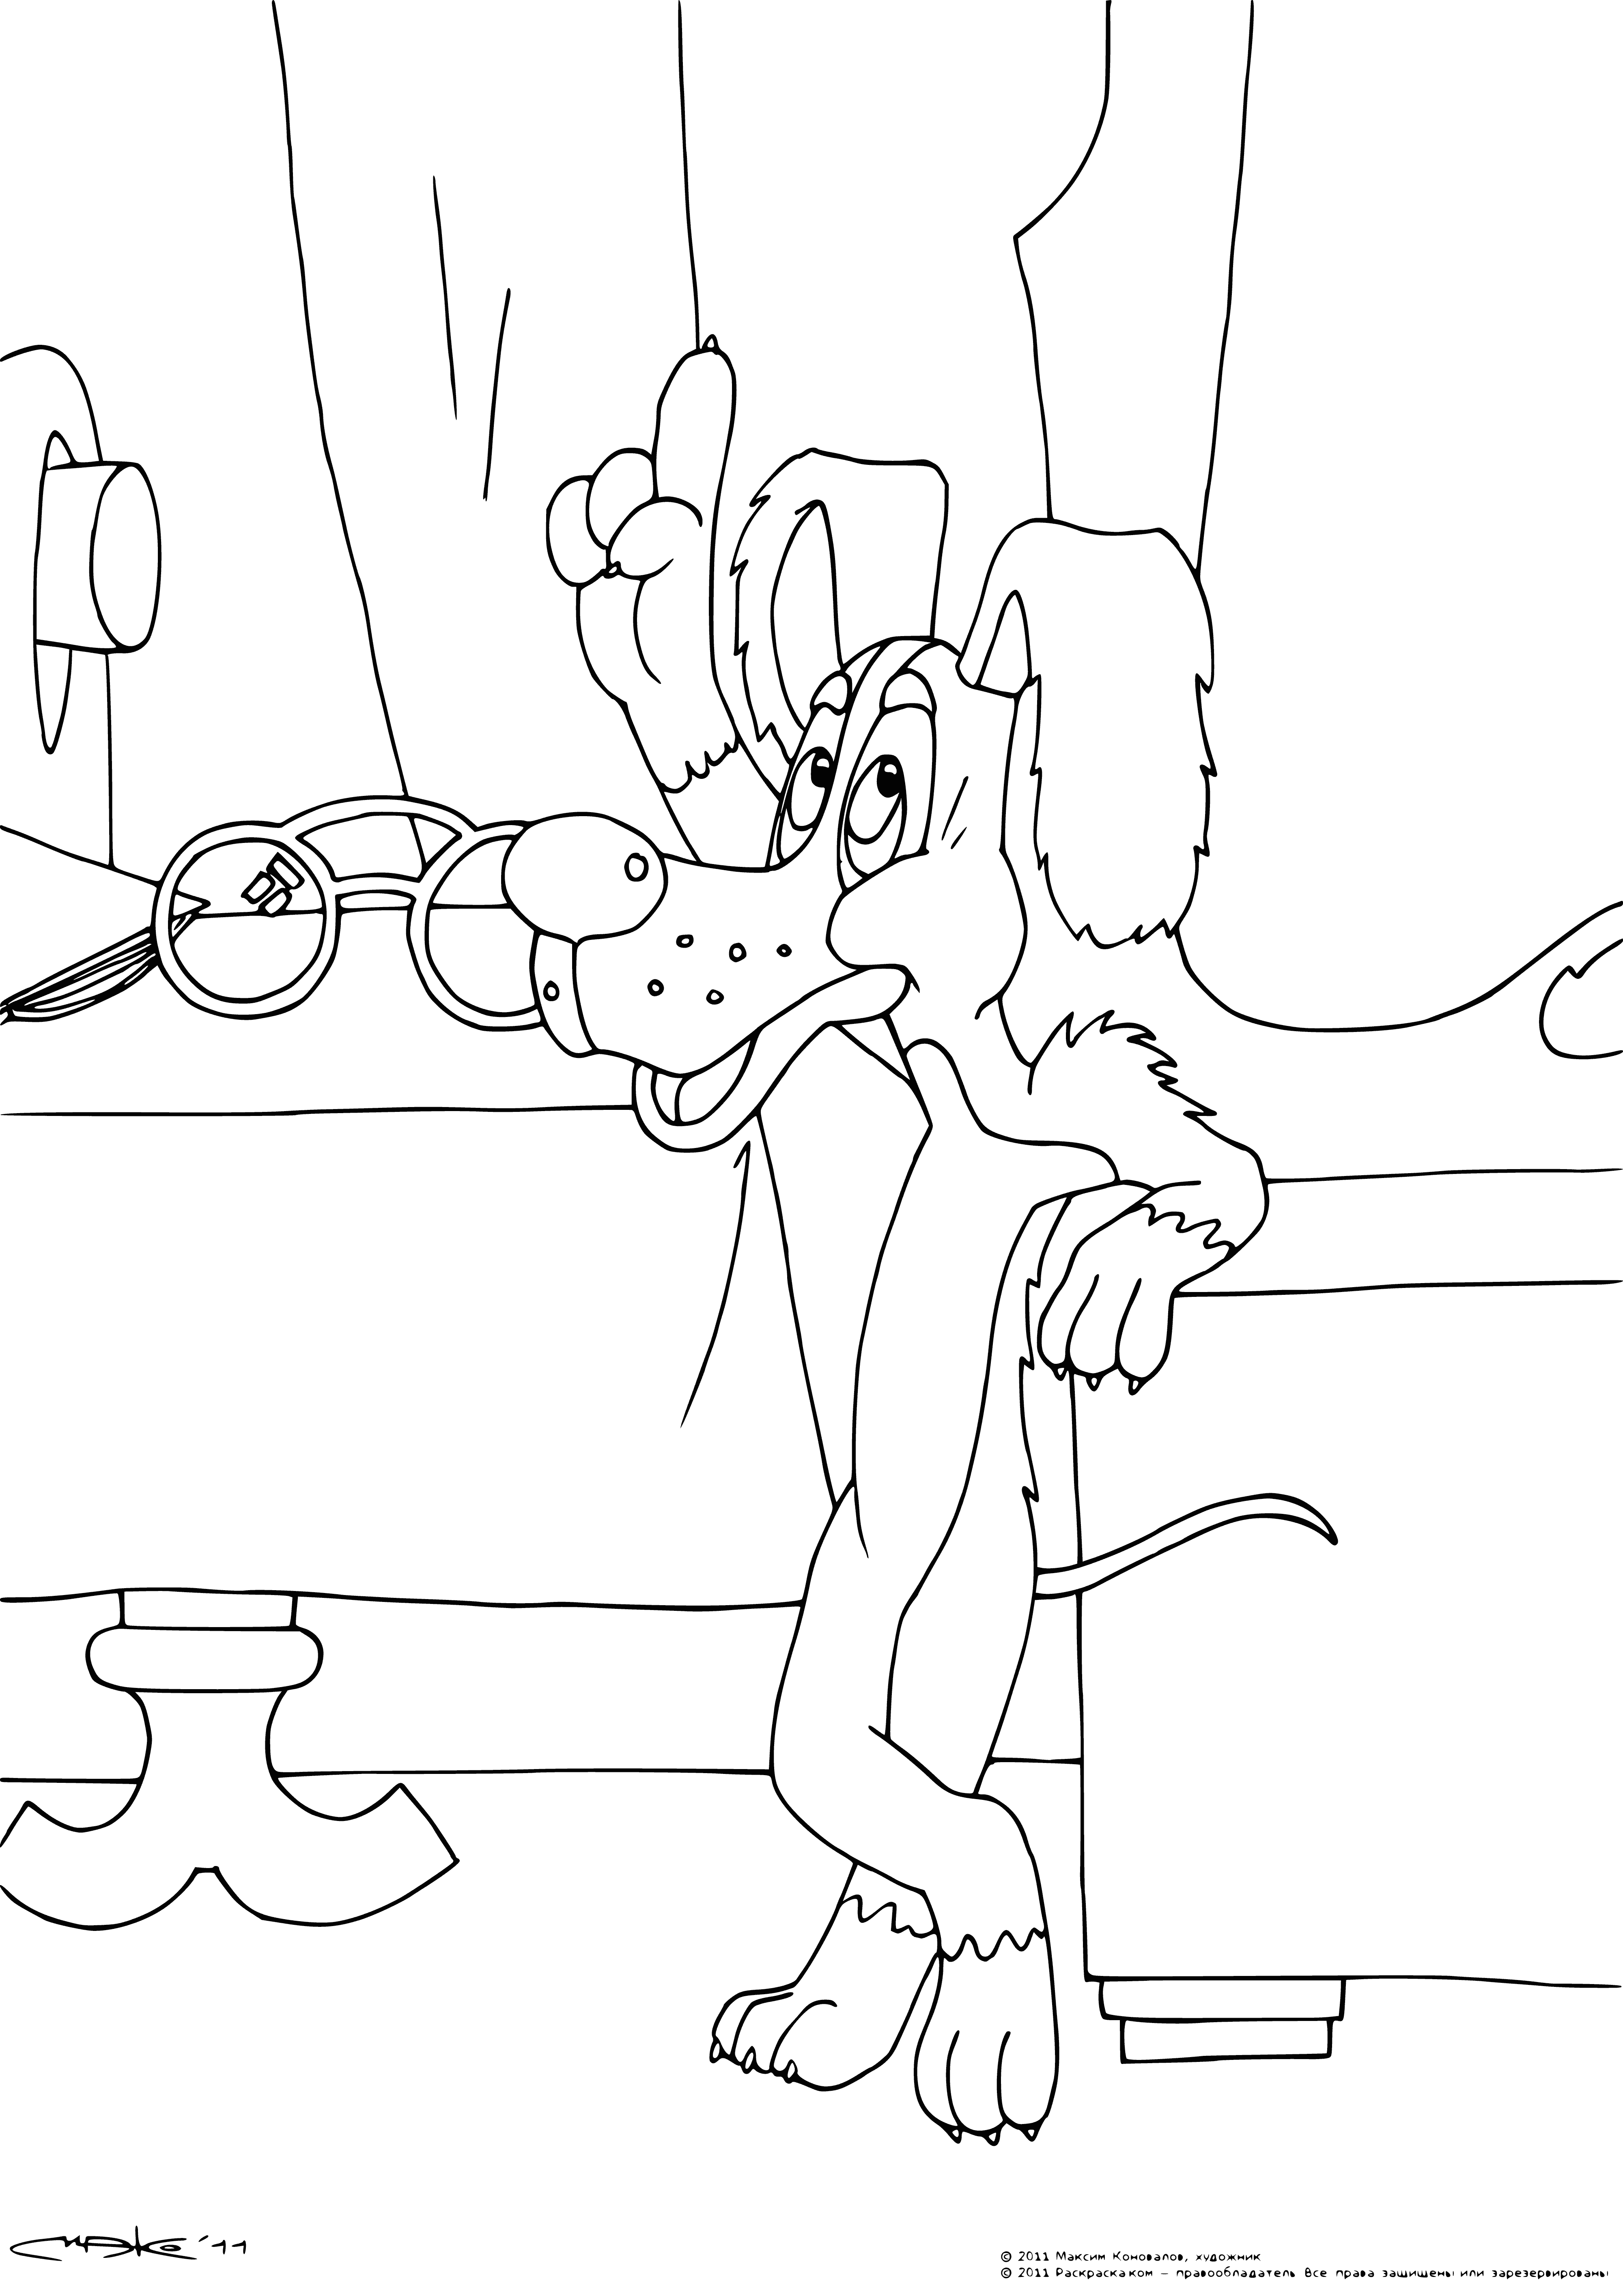 coloring page: Bobik stands on the sidewalk next to a fence facing Barbos, a large brown and white cat perched in a tree.